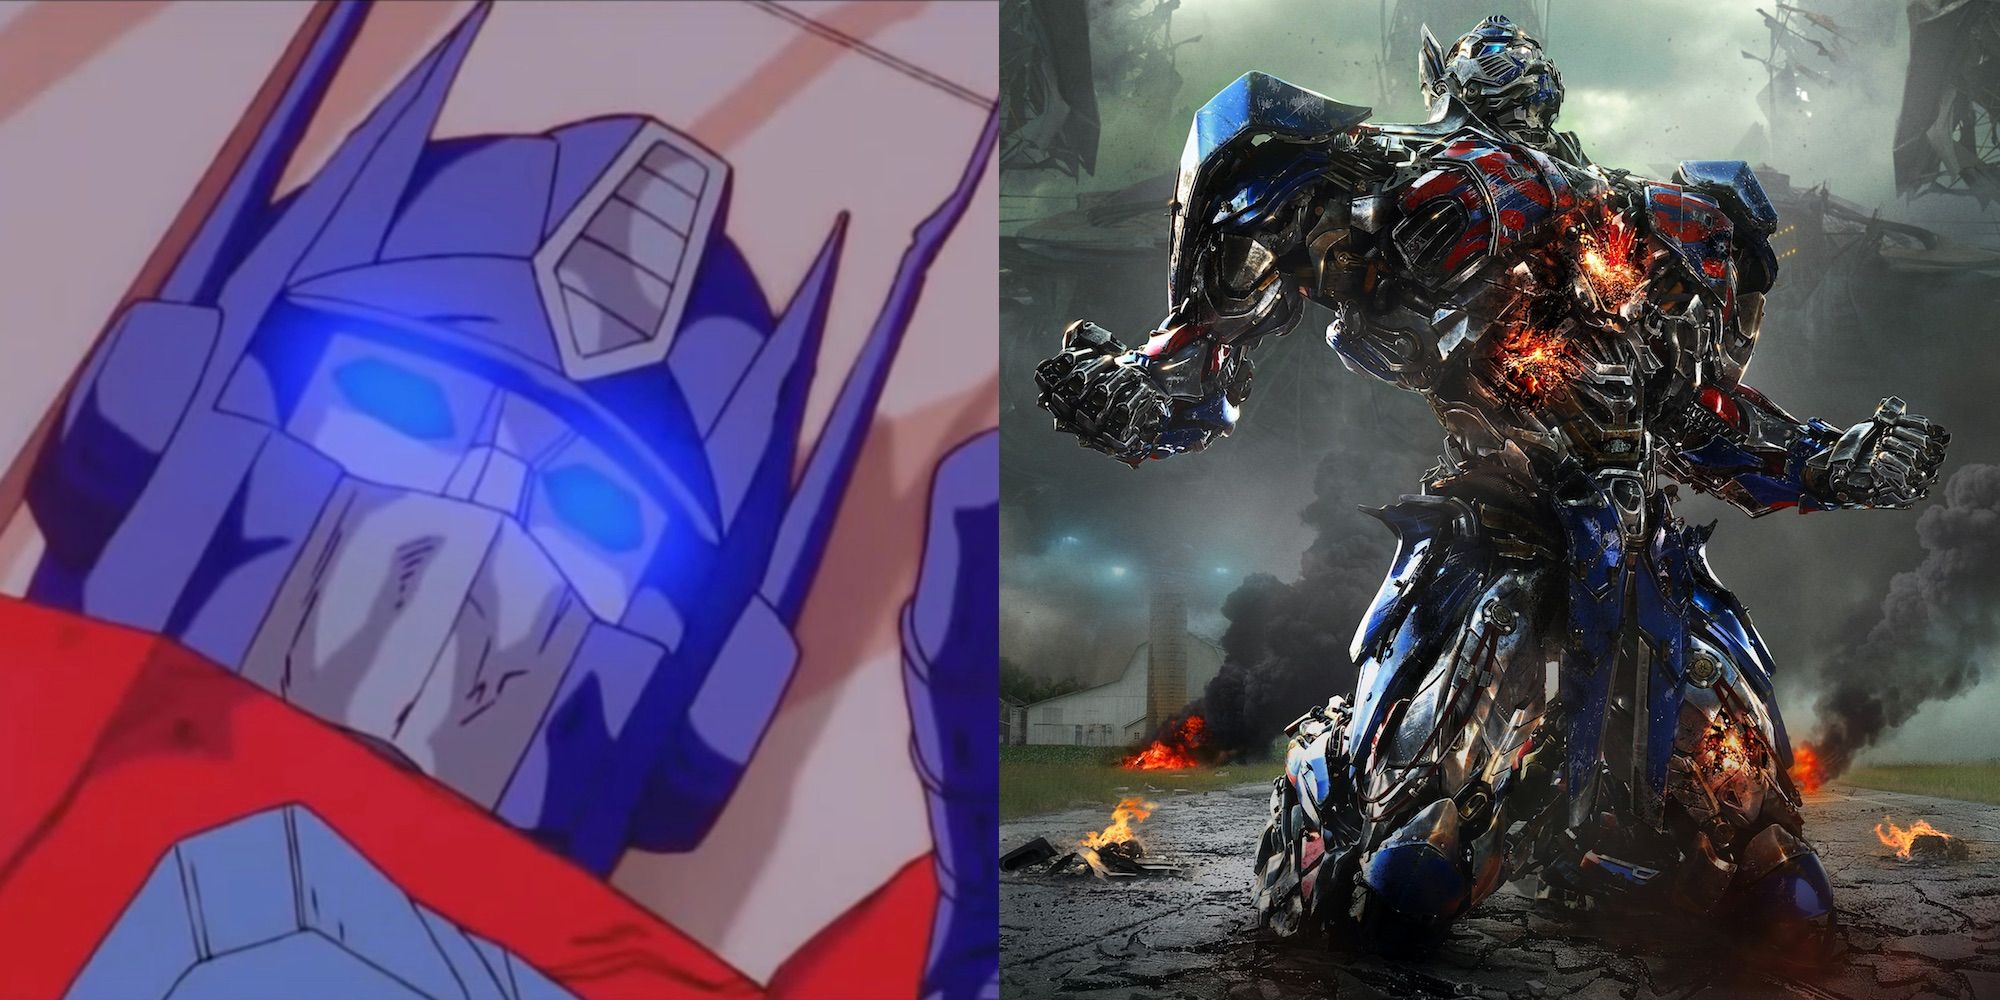 CRACKED.com — Michael Bay gave the part of Megatron in